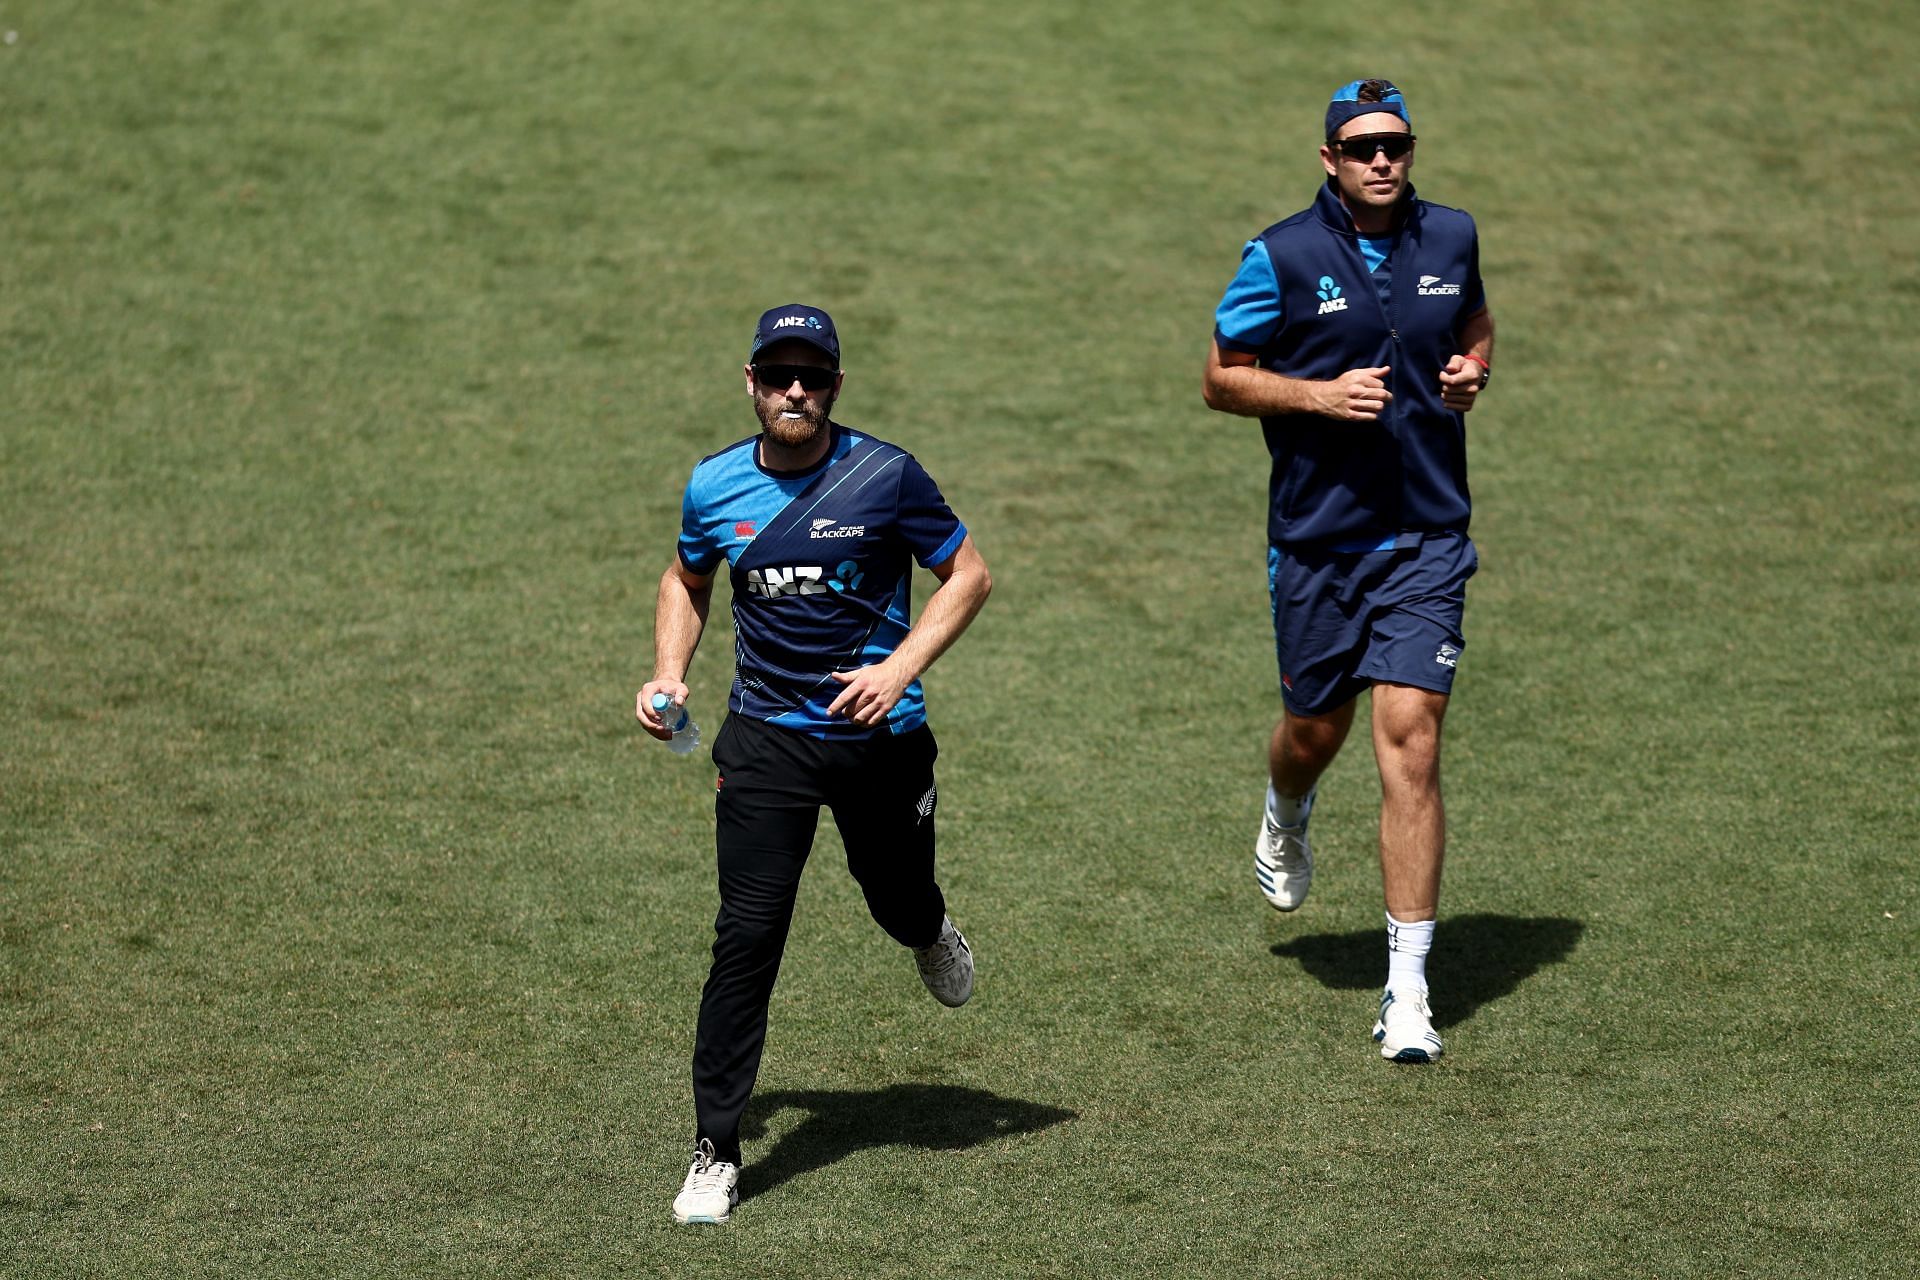  New Zealand Training Session &amp; Pakistan Press Conference (Image: Getty)